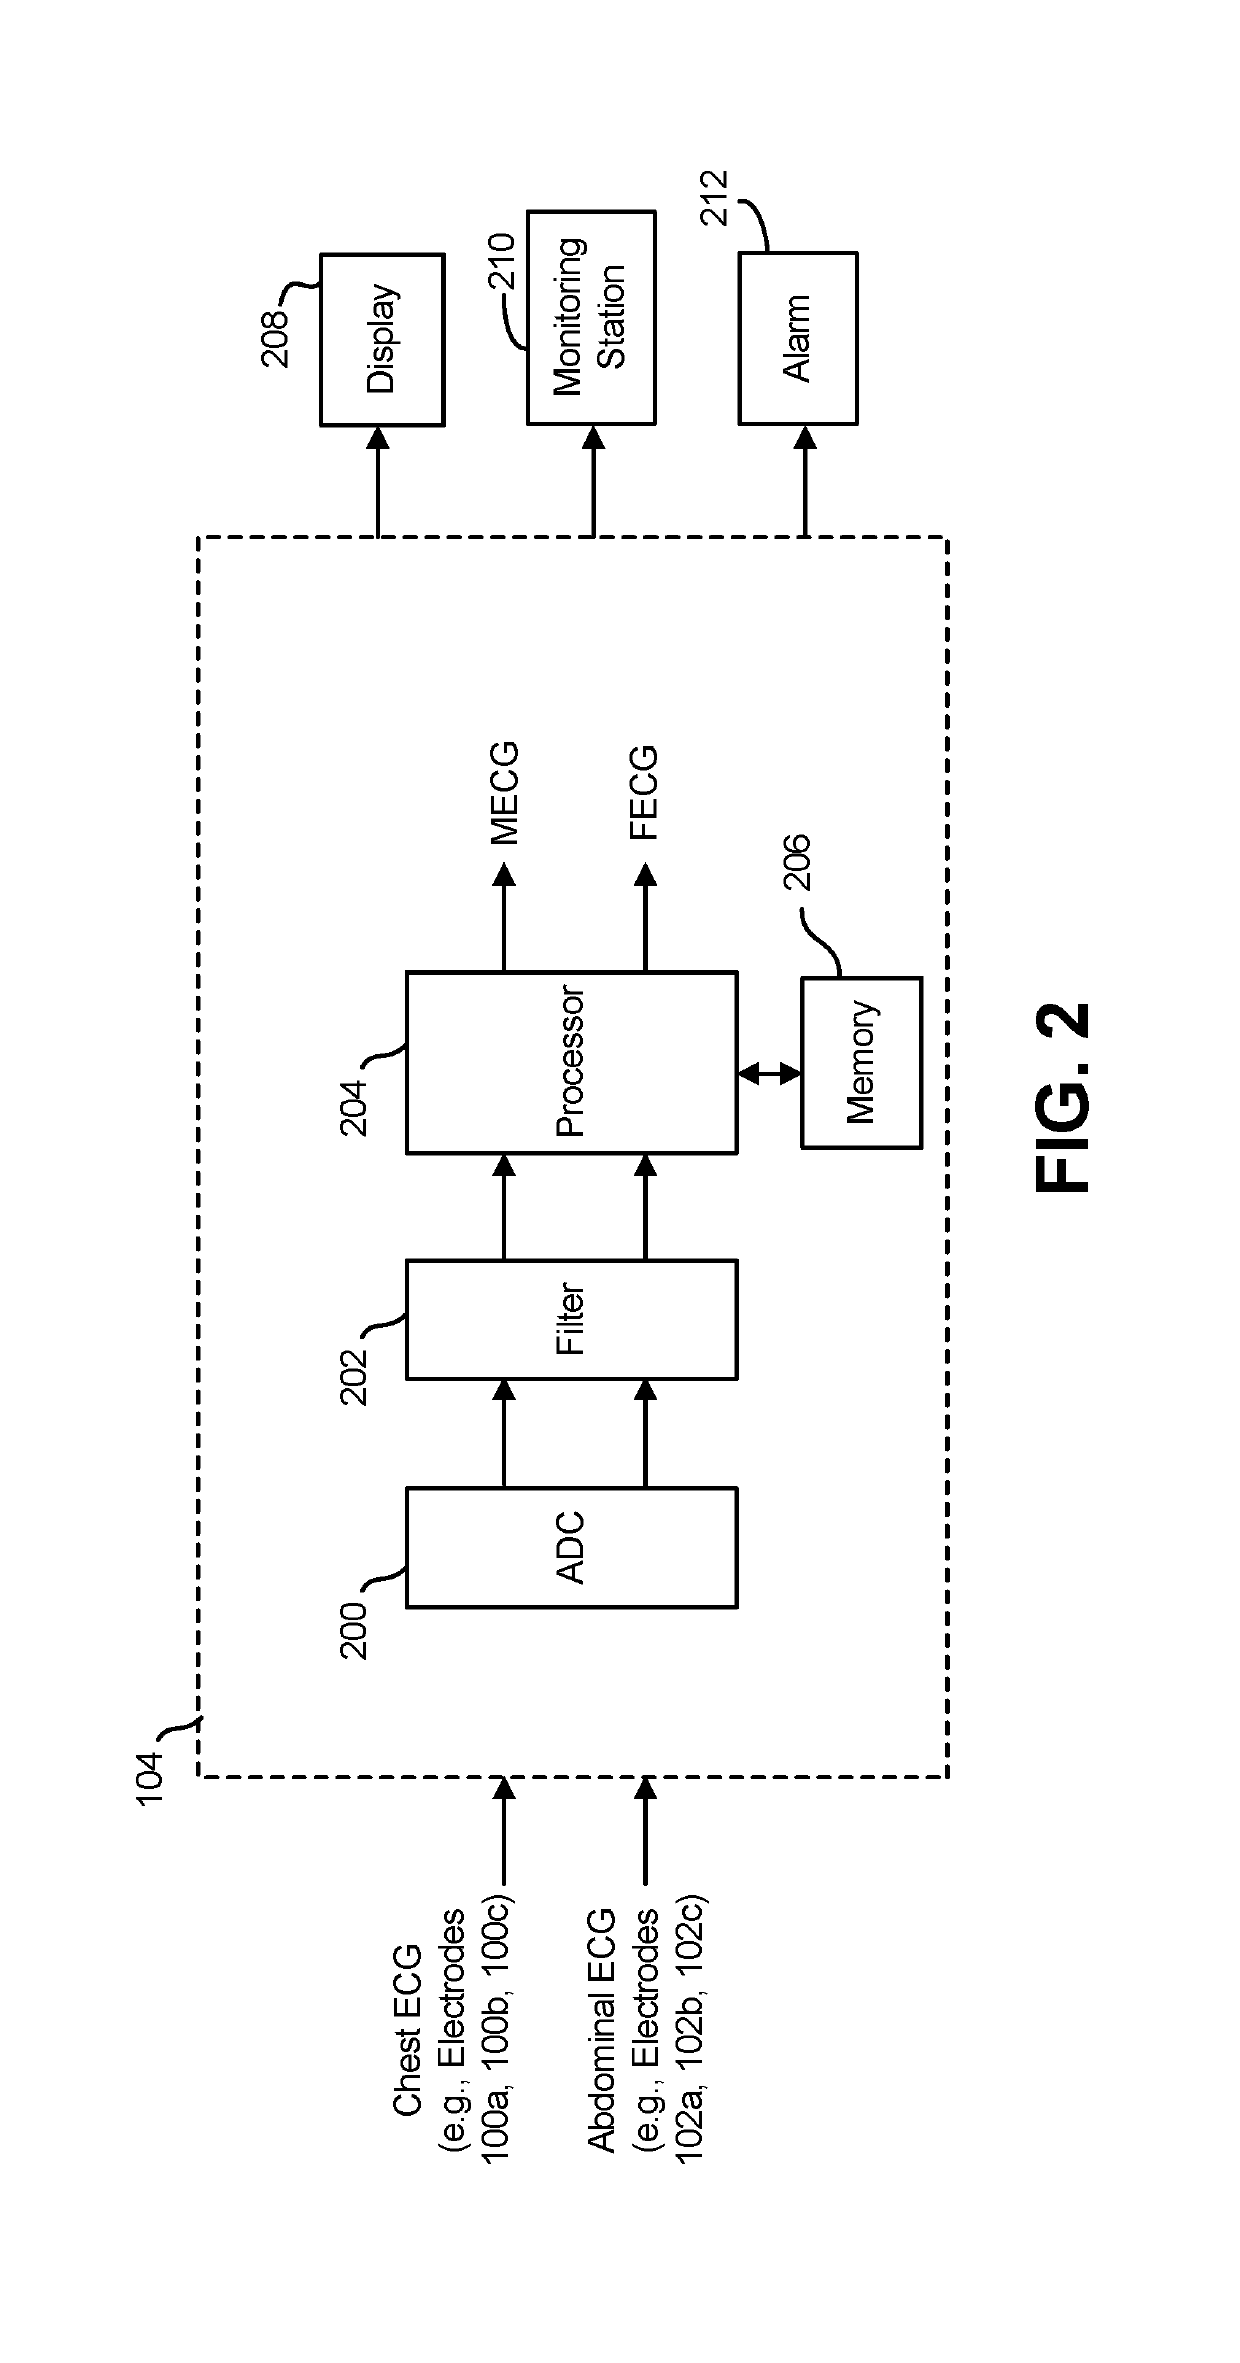 System and method for non-invasive extraction of fetal electrocardiogram signals